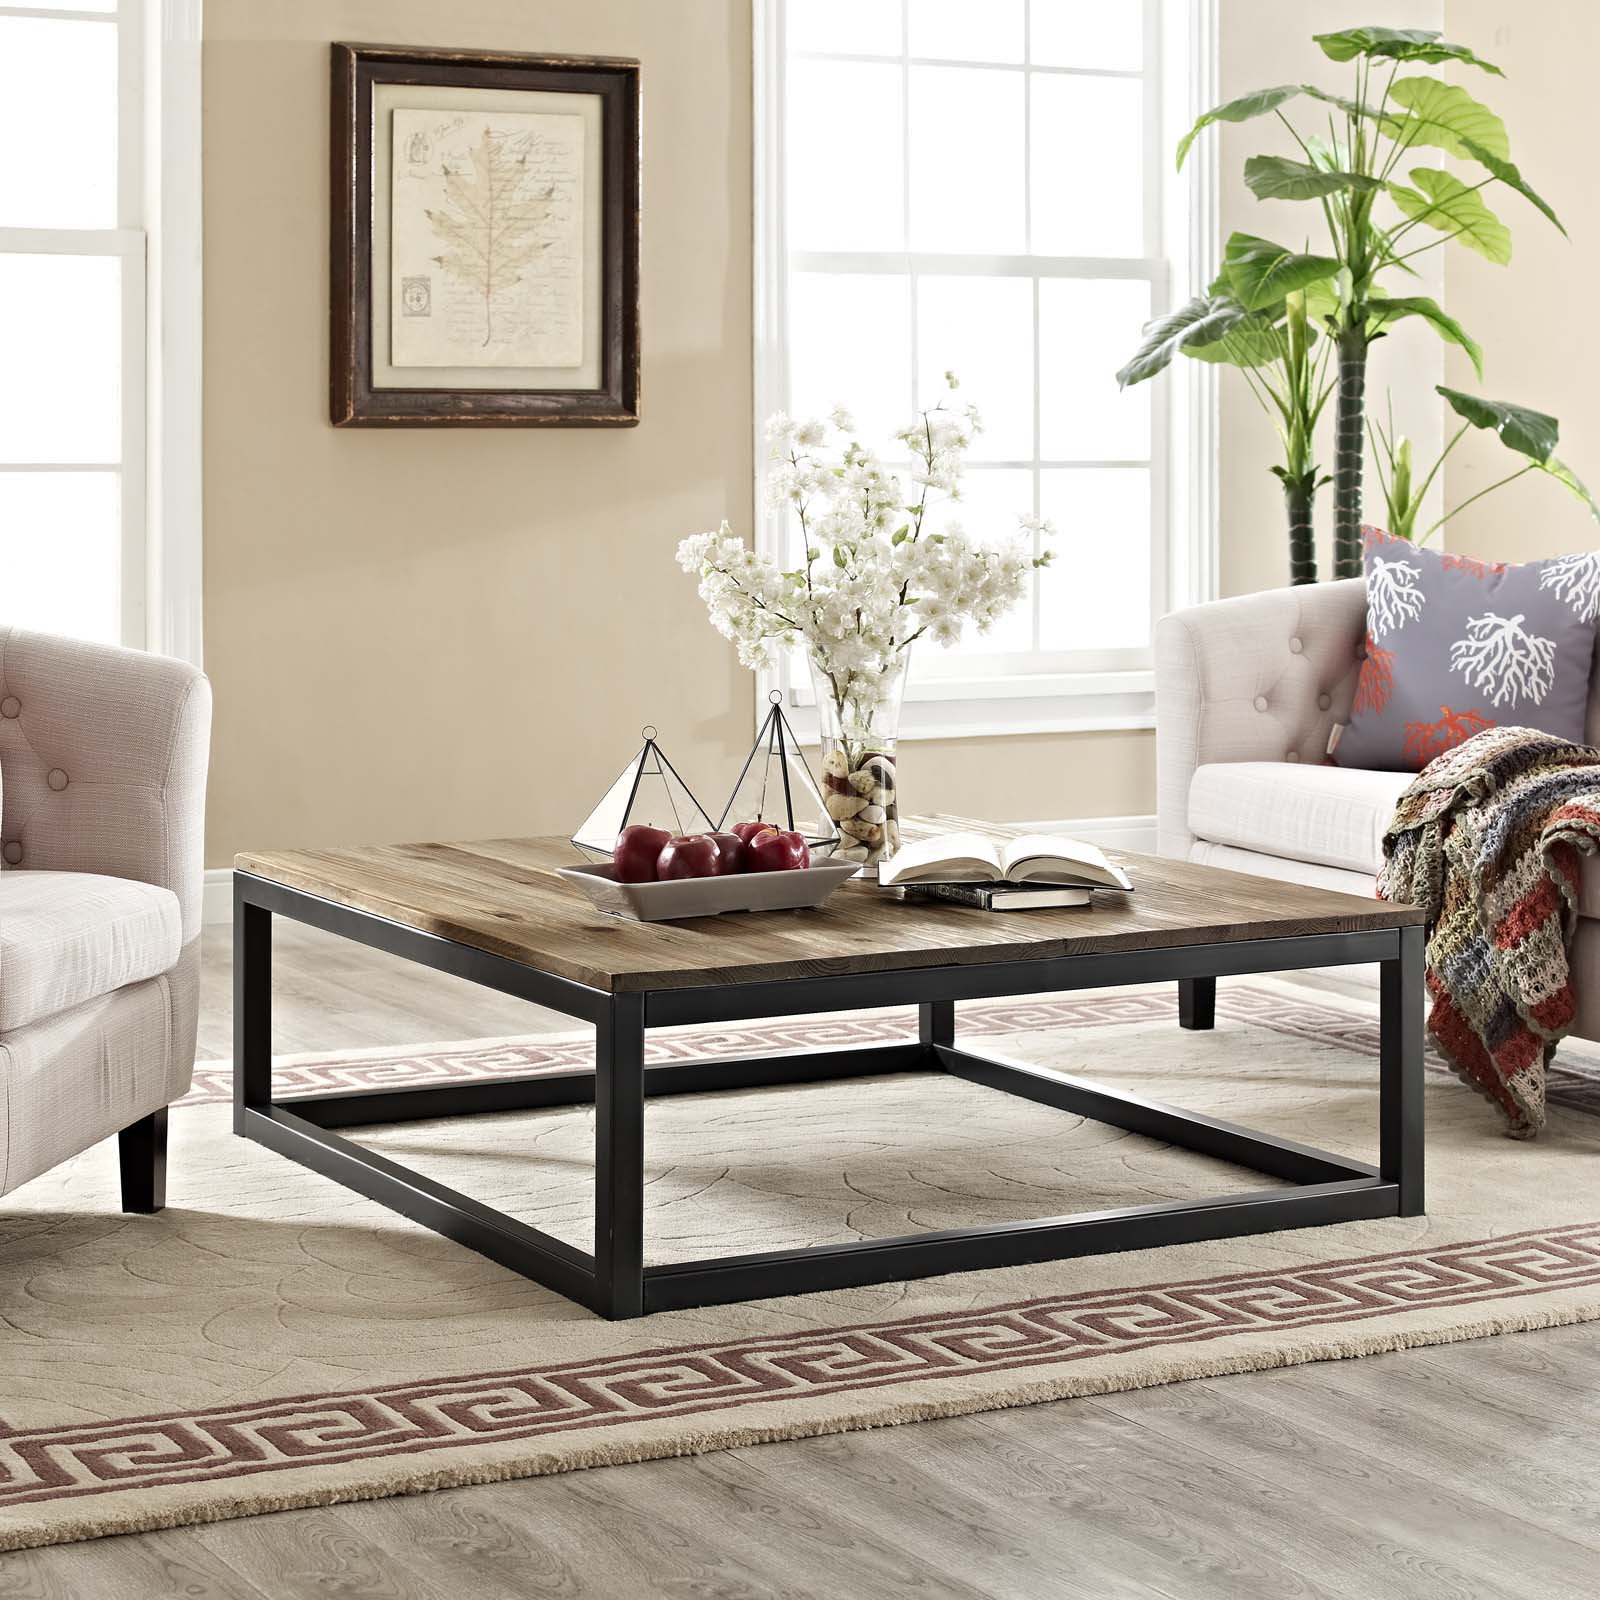 Attune Large Coffee Table - East Shore Modern Home Furnishings